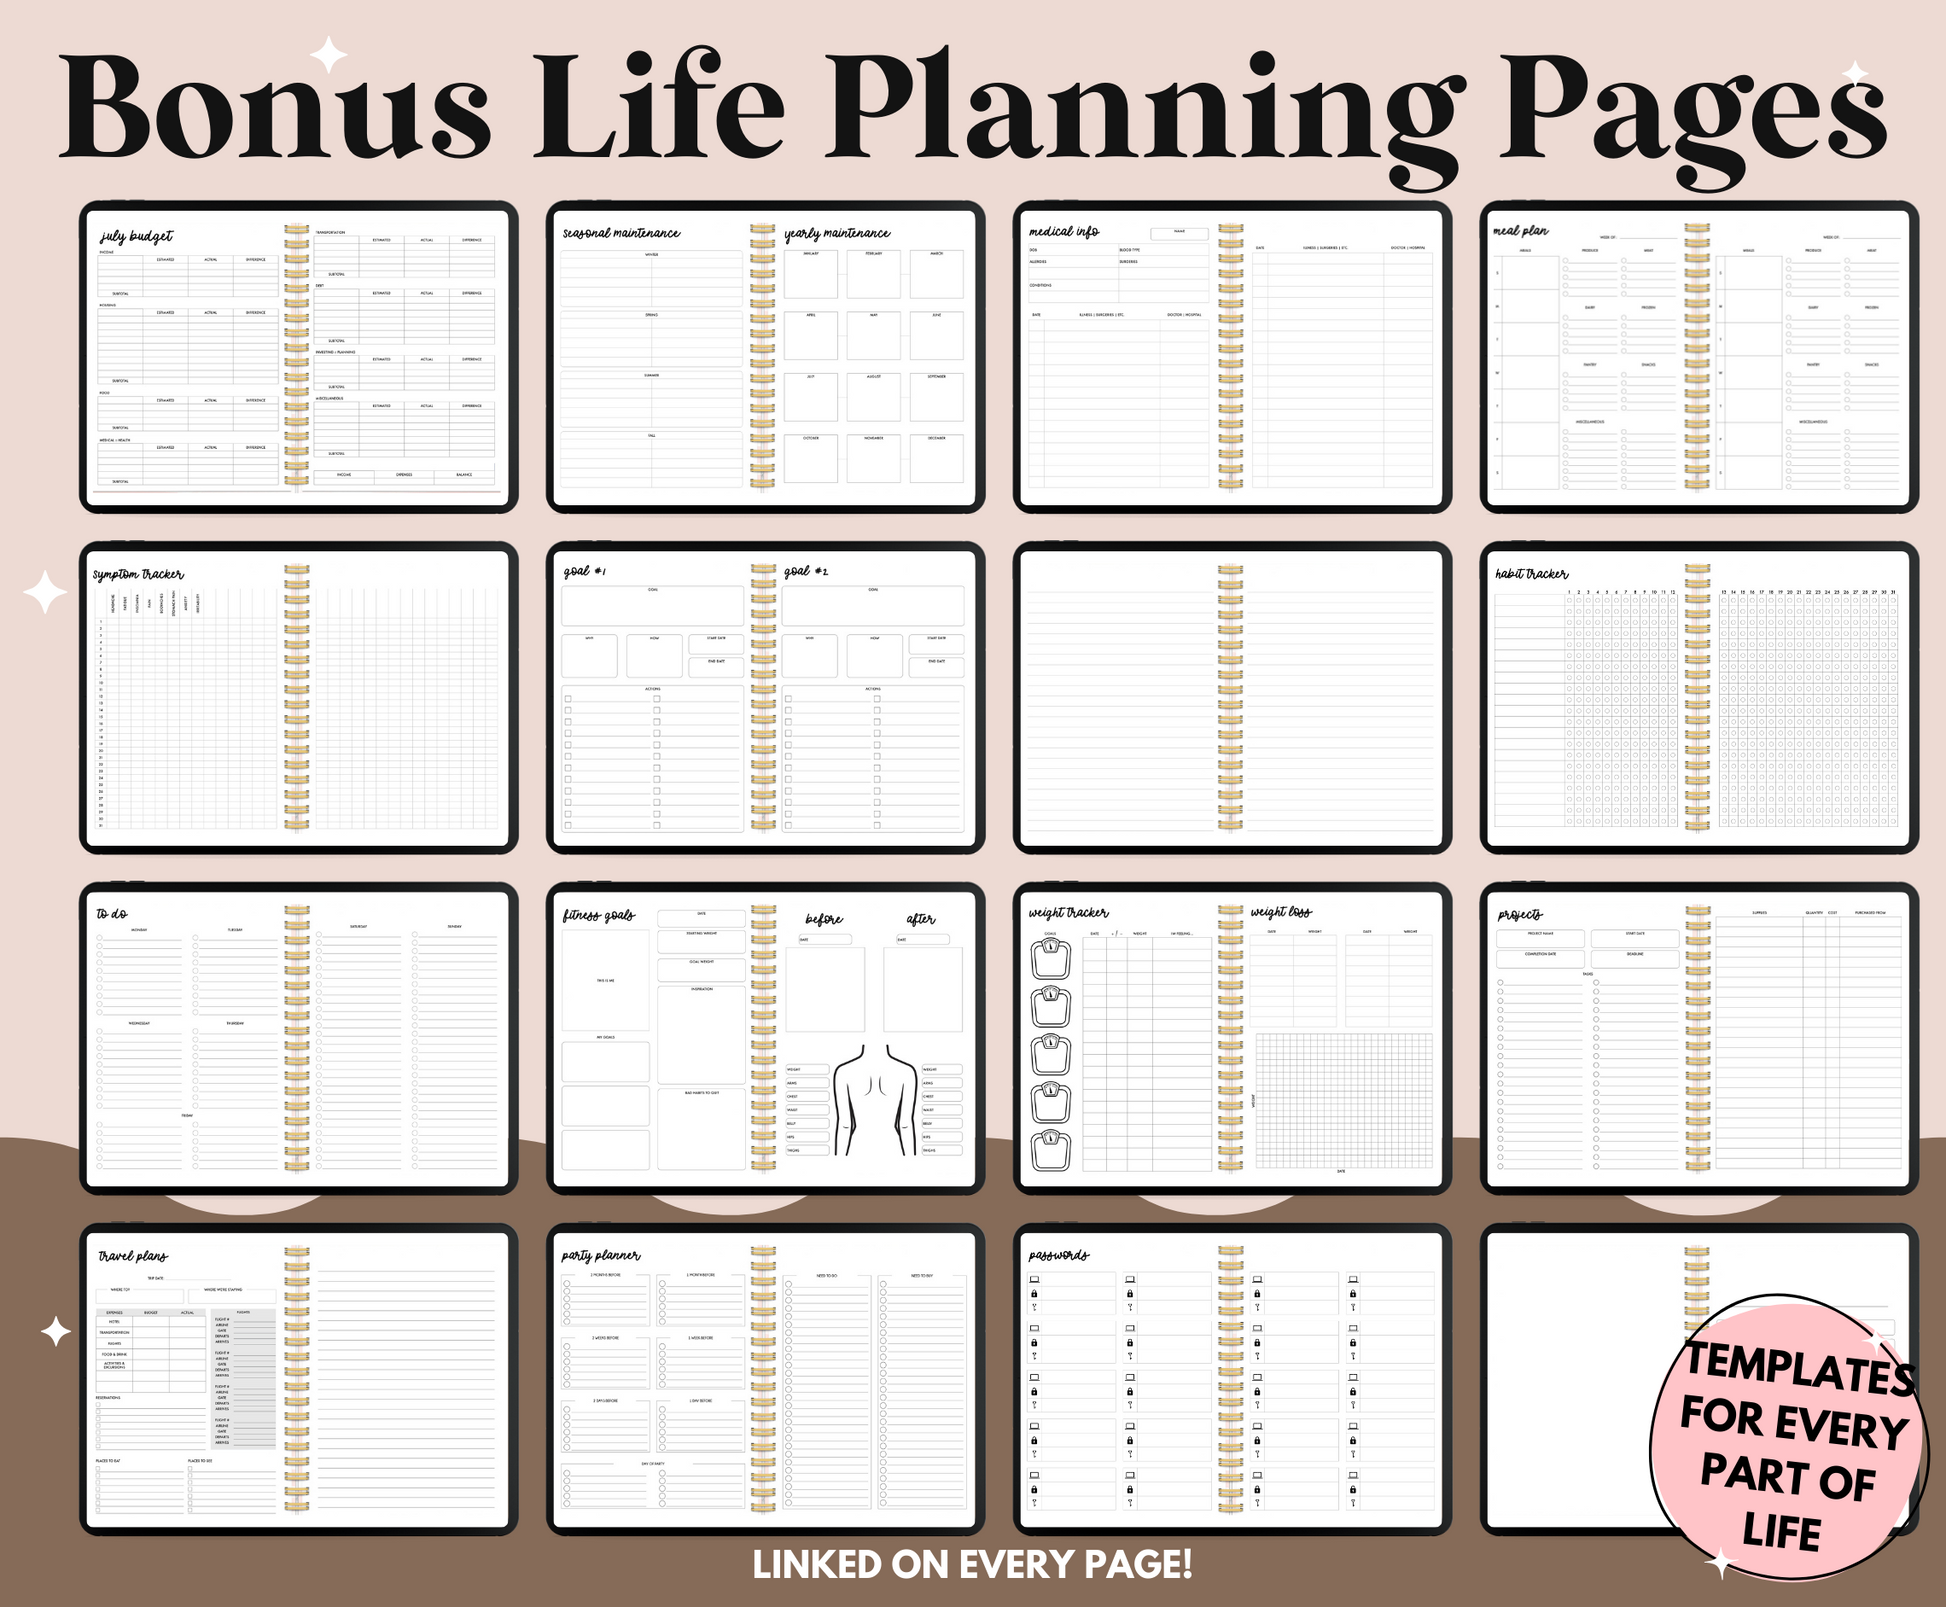 2024 Neutral Digital Life Planner – Paper Hearts Planner Co.